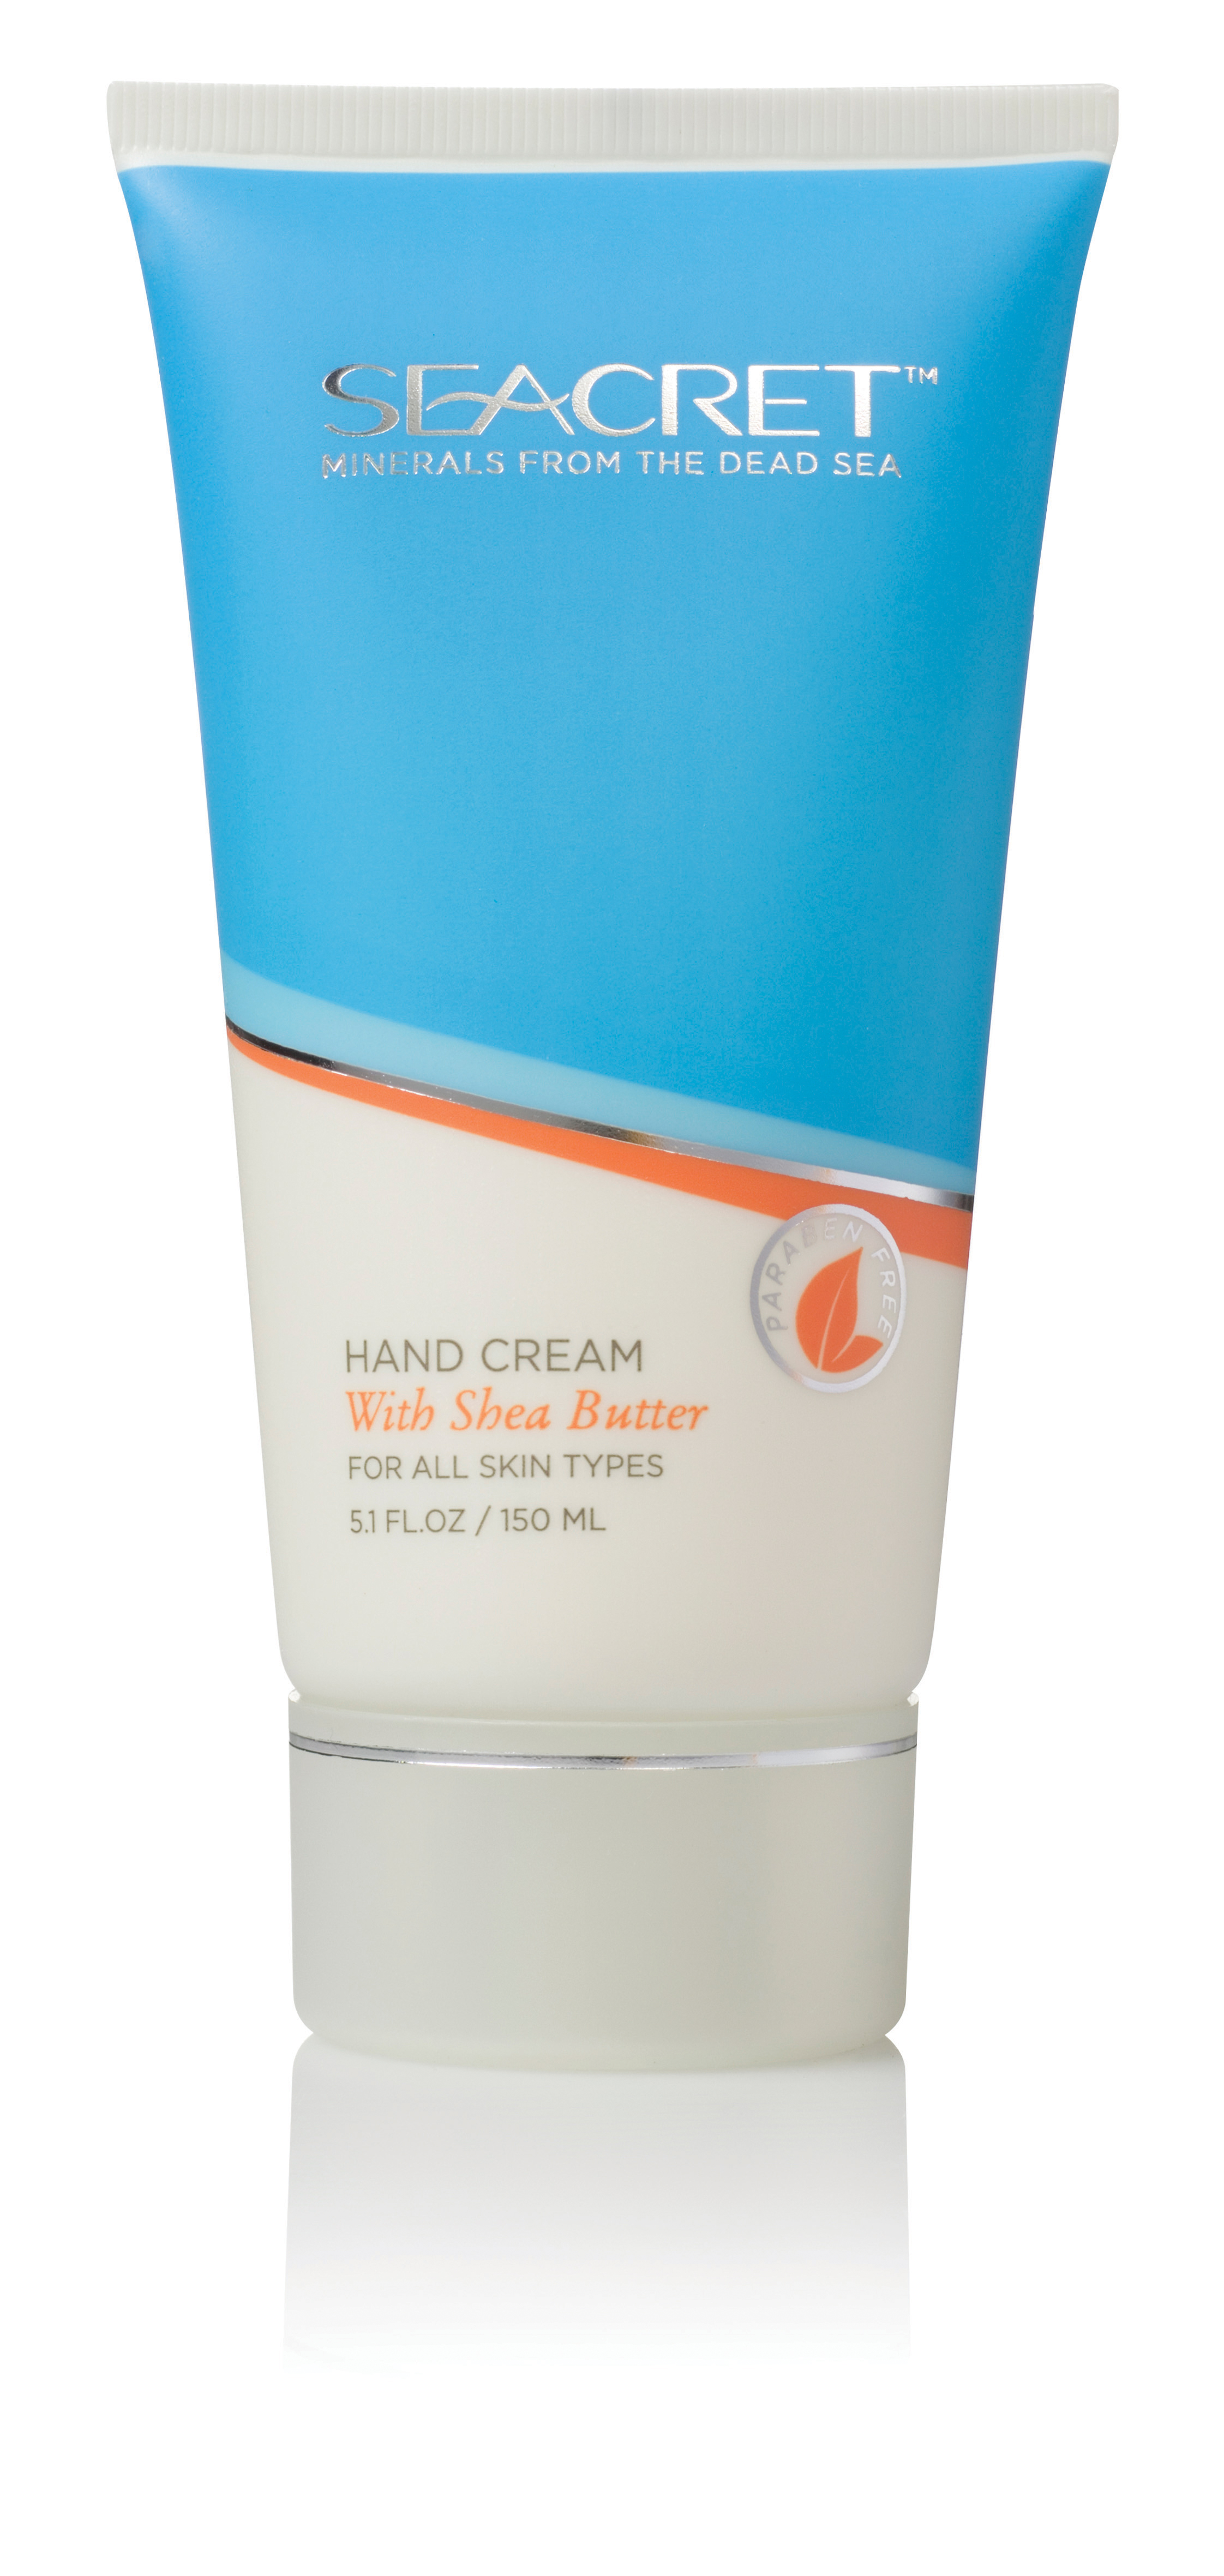 Hand Cream with Shea Butter